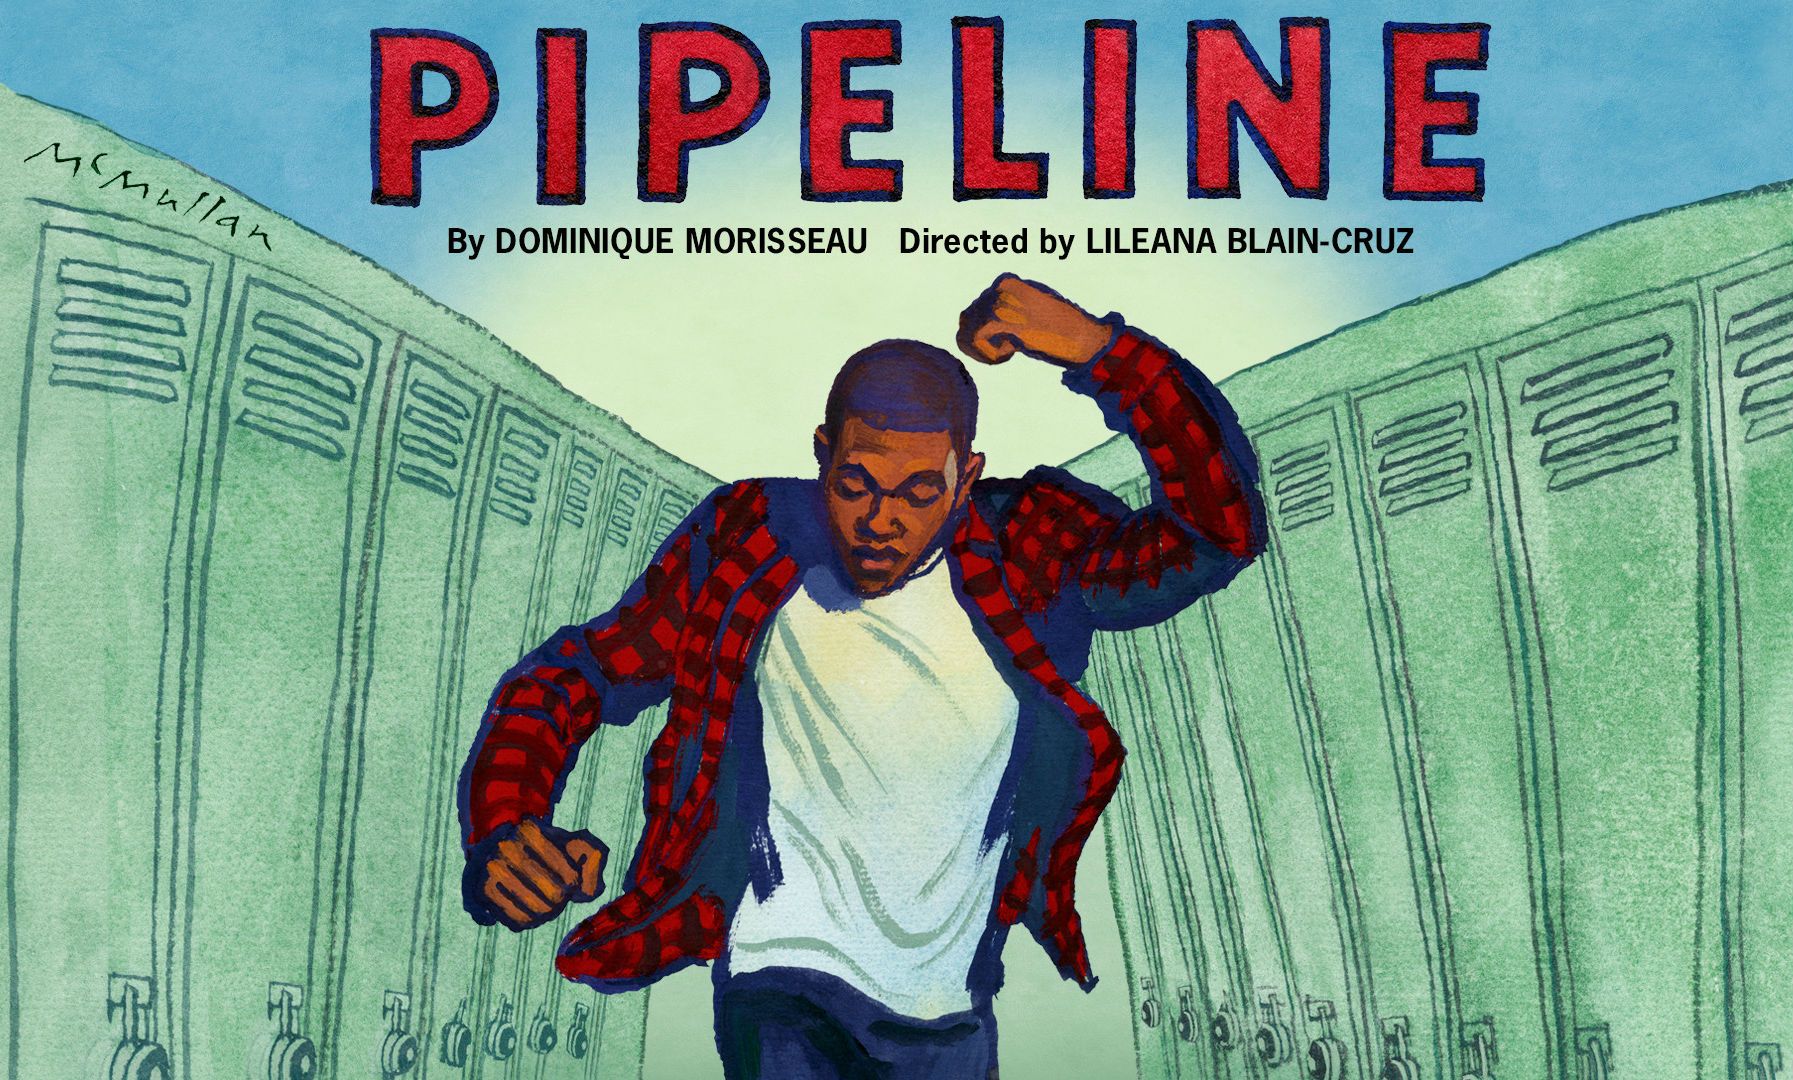 Lincoln Center Theater's 'Pipeline' now streaming on BroadwayHD